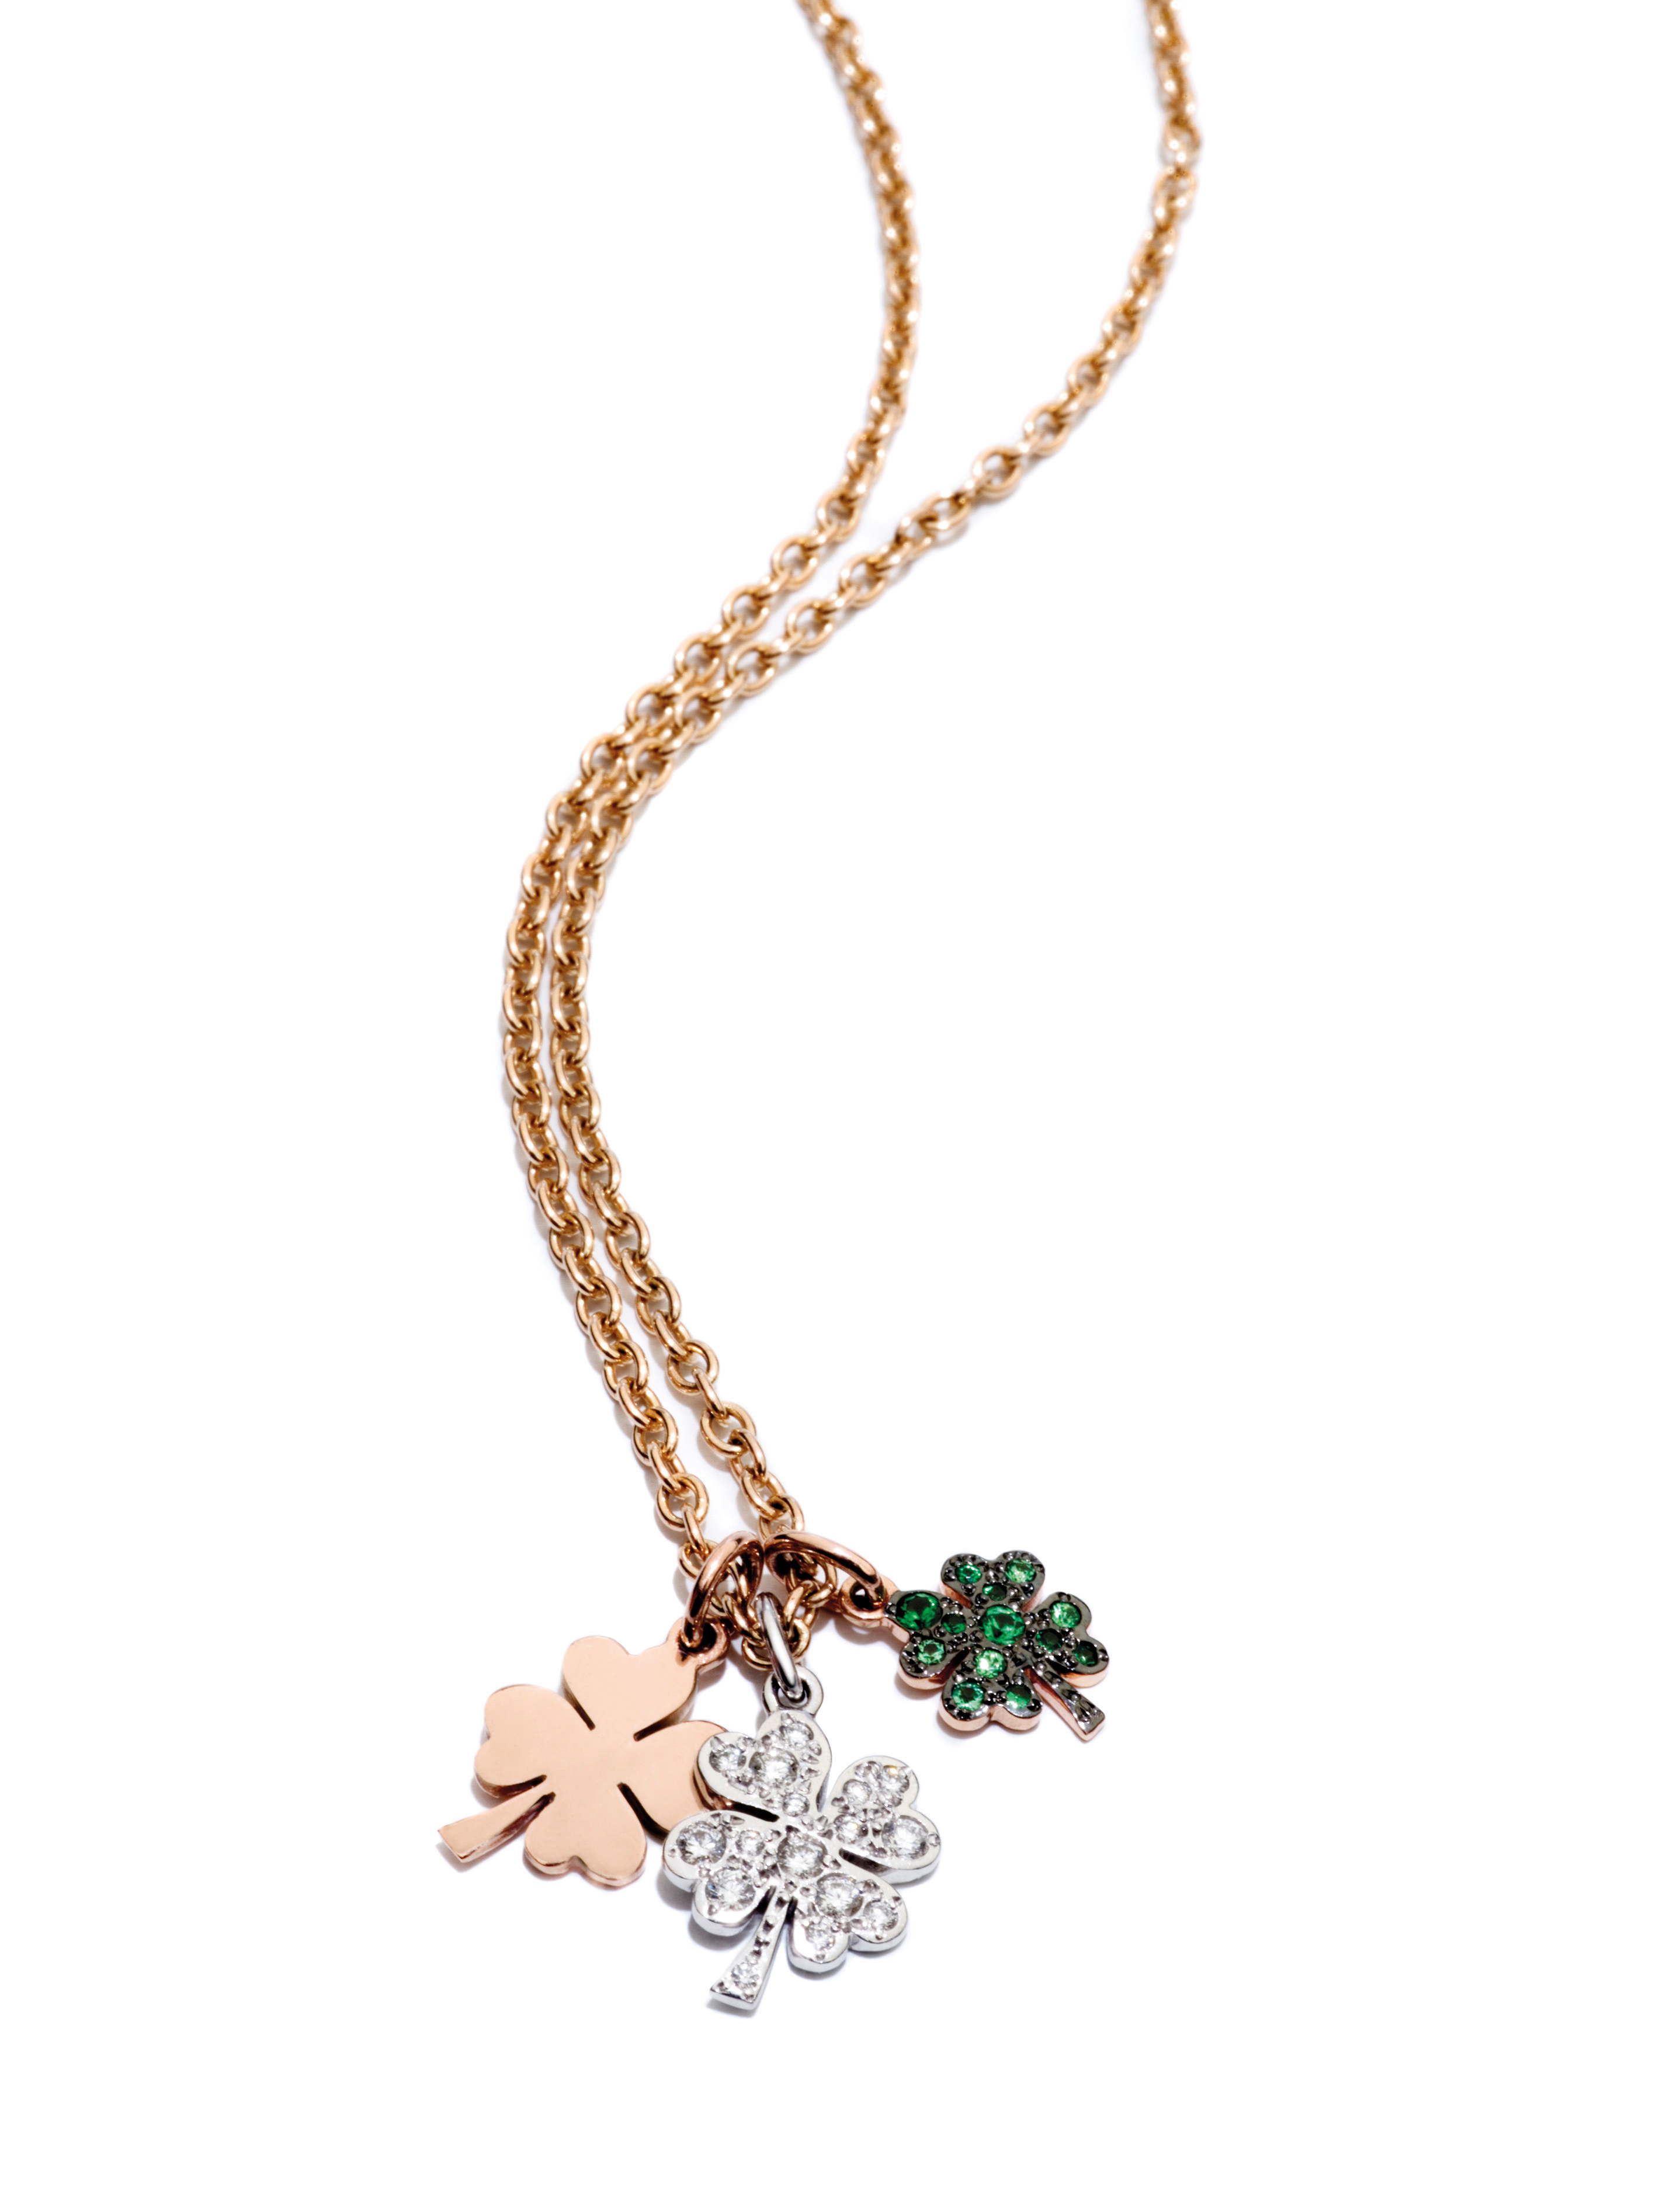 Dodo - Good Luck  Charms Chain £250 Charms FROM £150 for a single charm